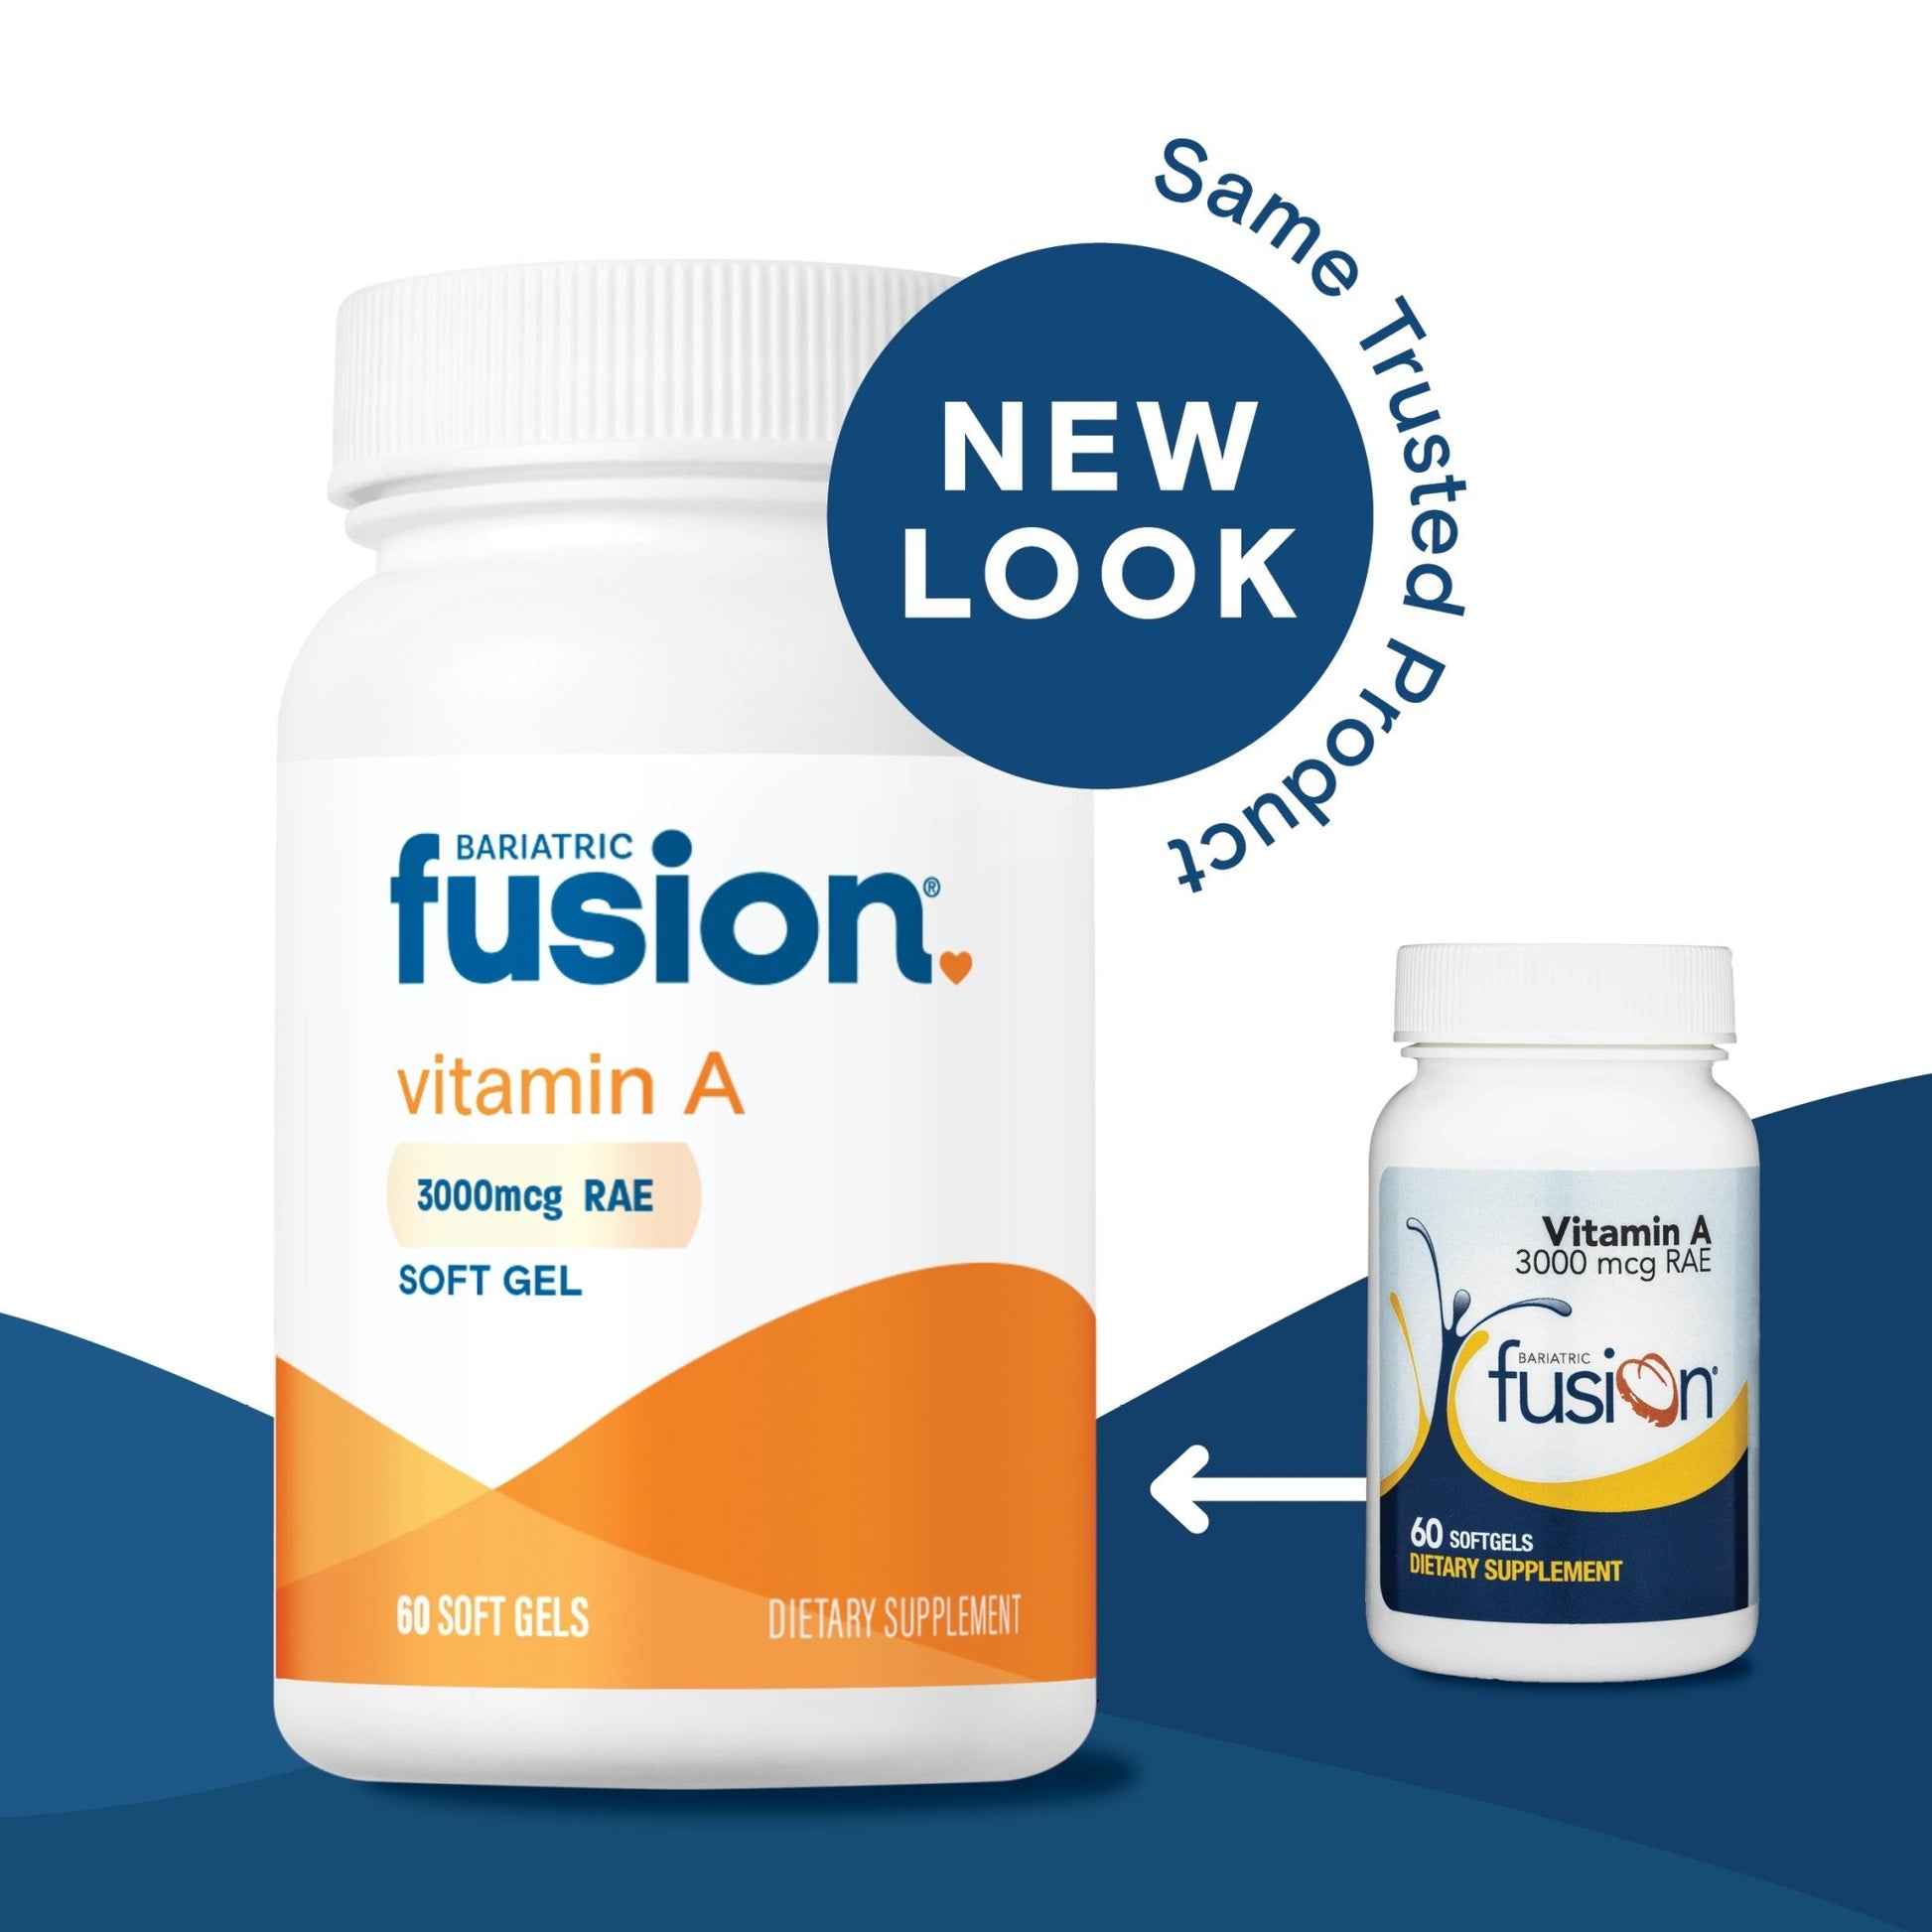 Bariatric Fusion Vitamin A Softgel new look, same trusted product.